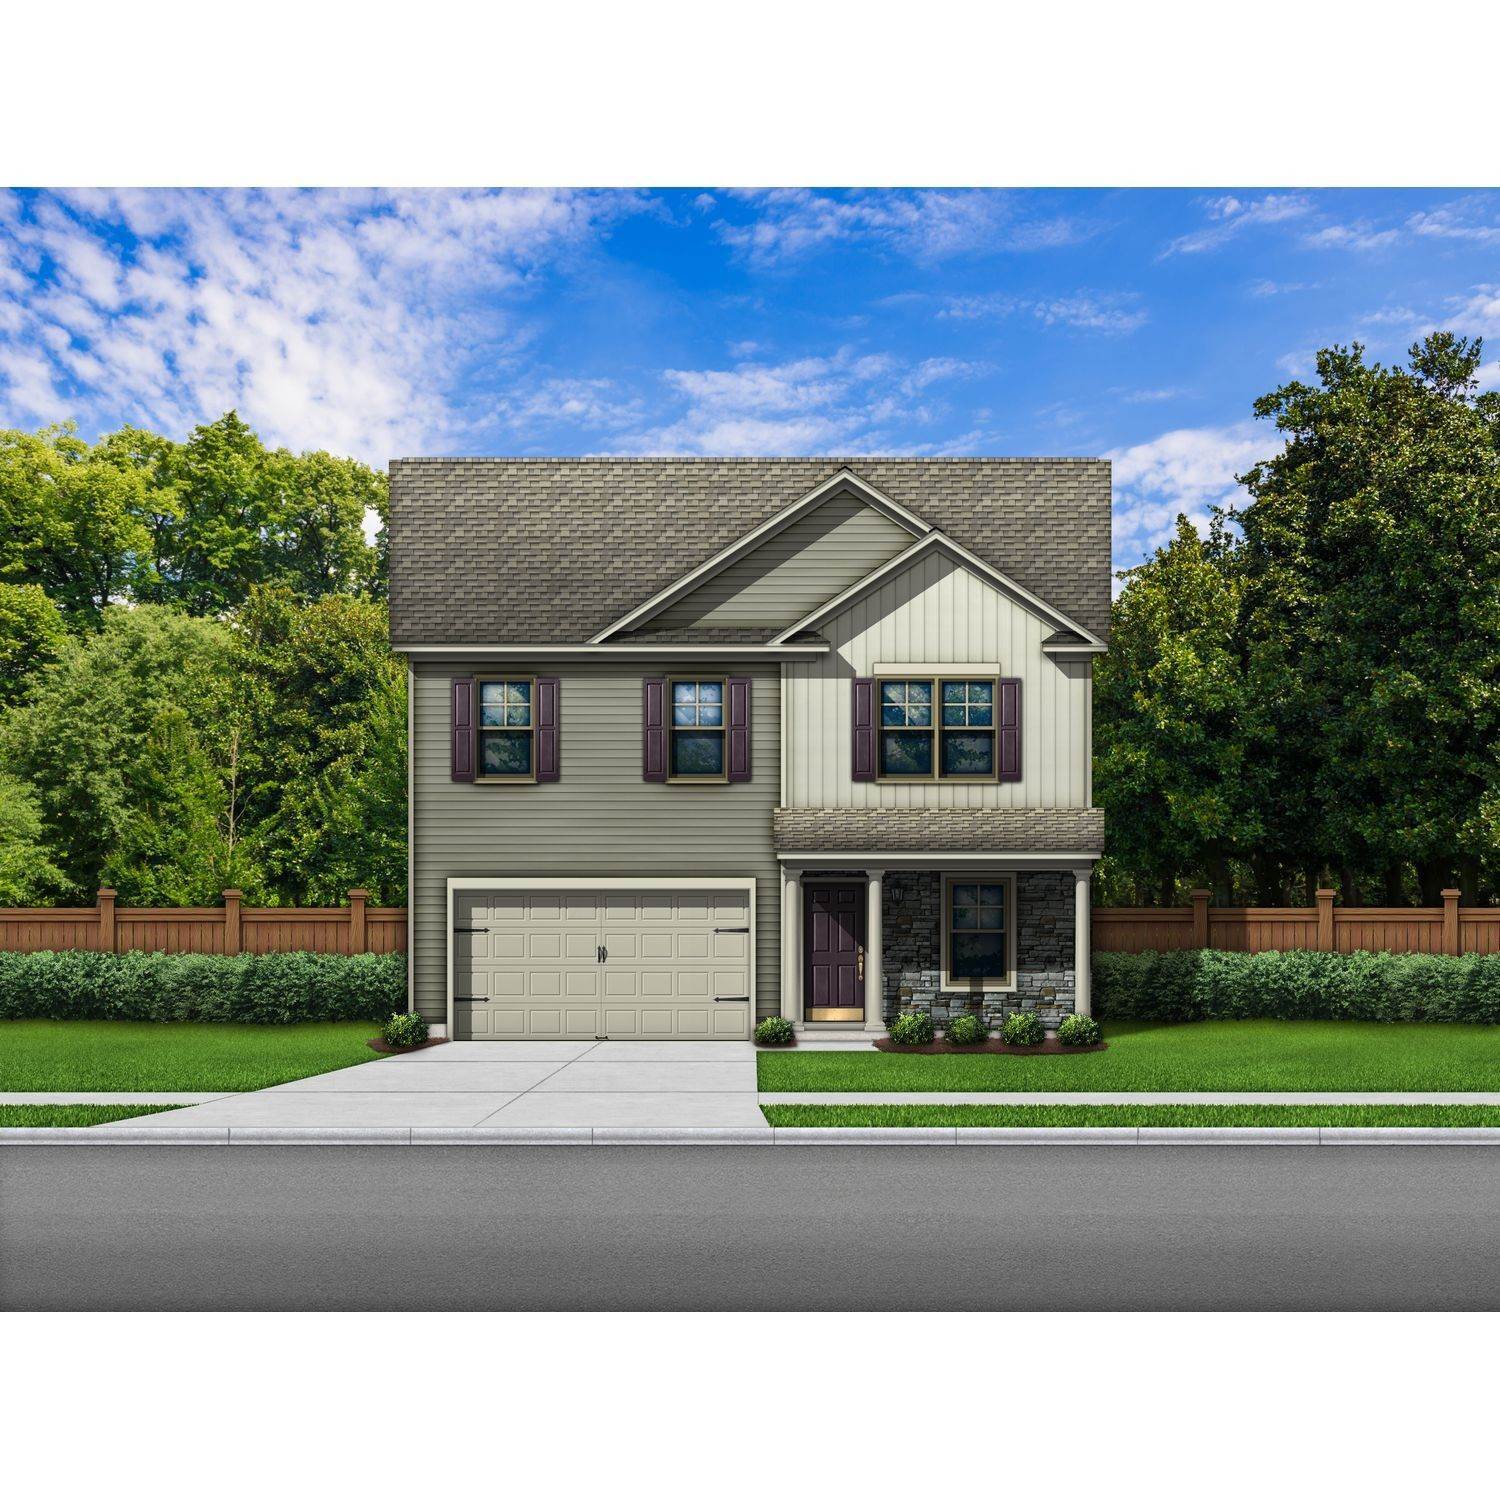 Single Family for Sale at Champions Village At Cherry Hill 448 Seaborn Circle, Pendleton, SC 29670